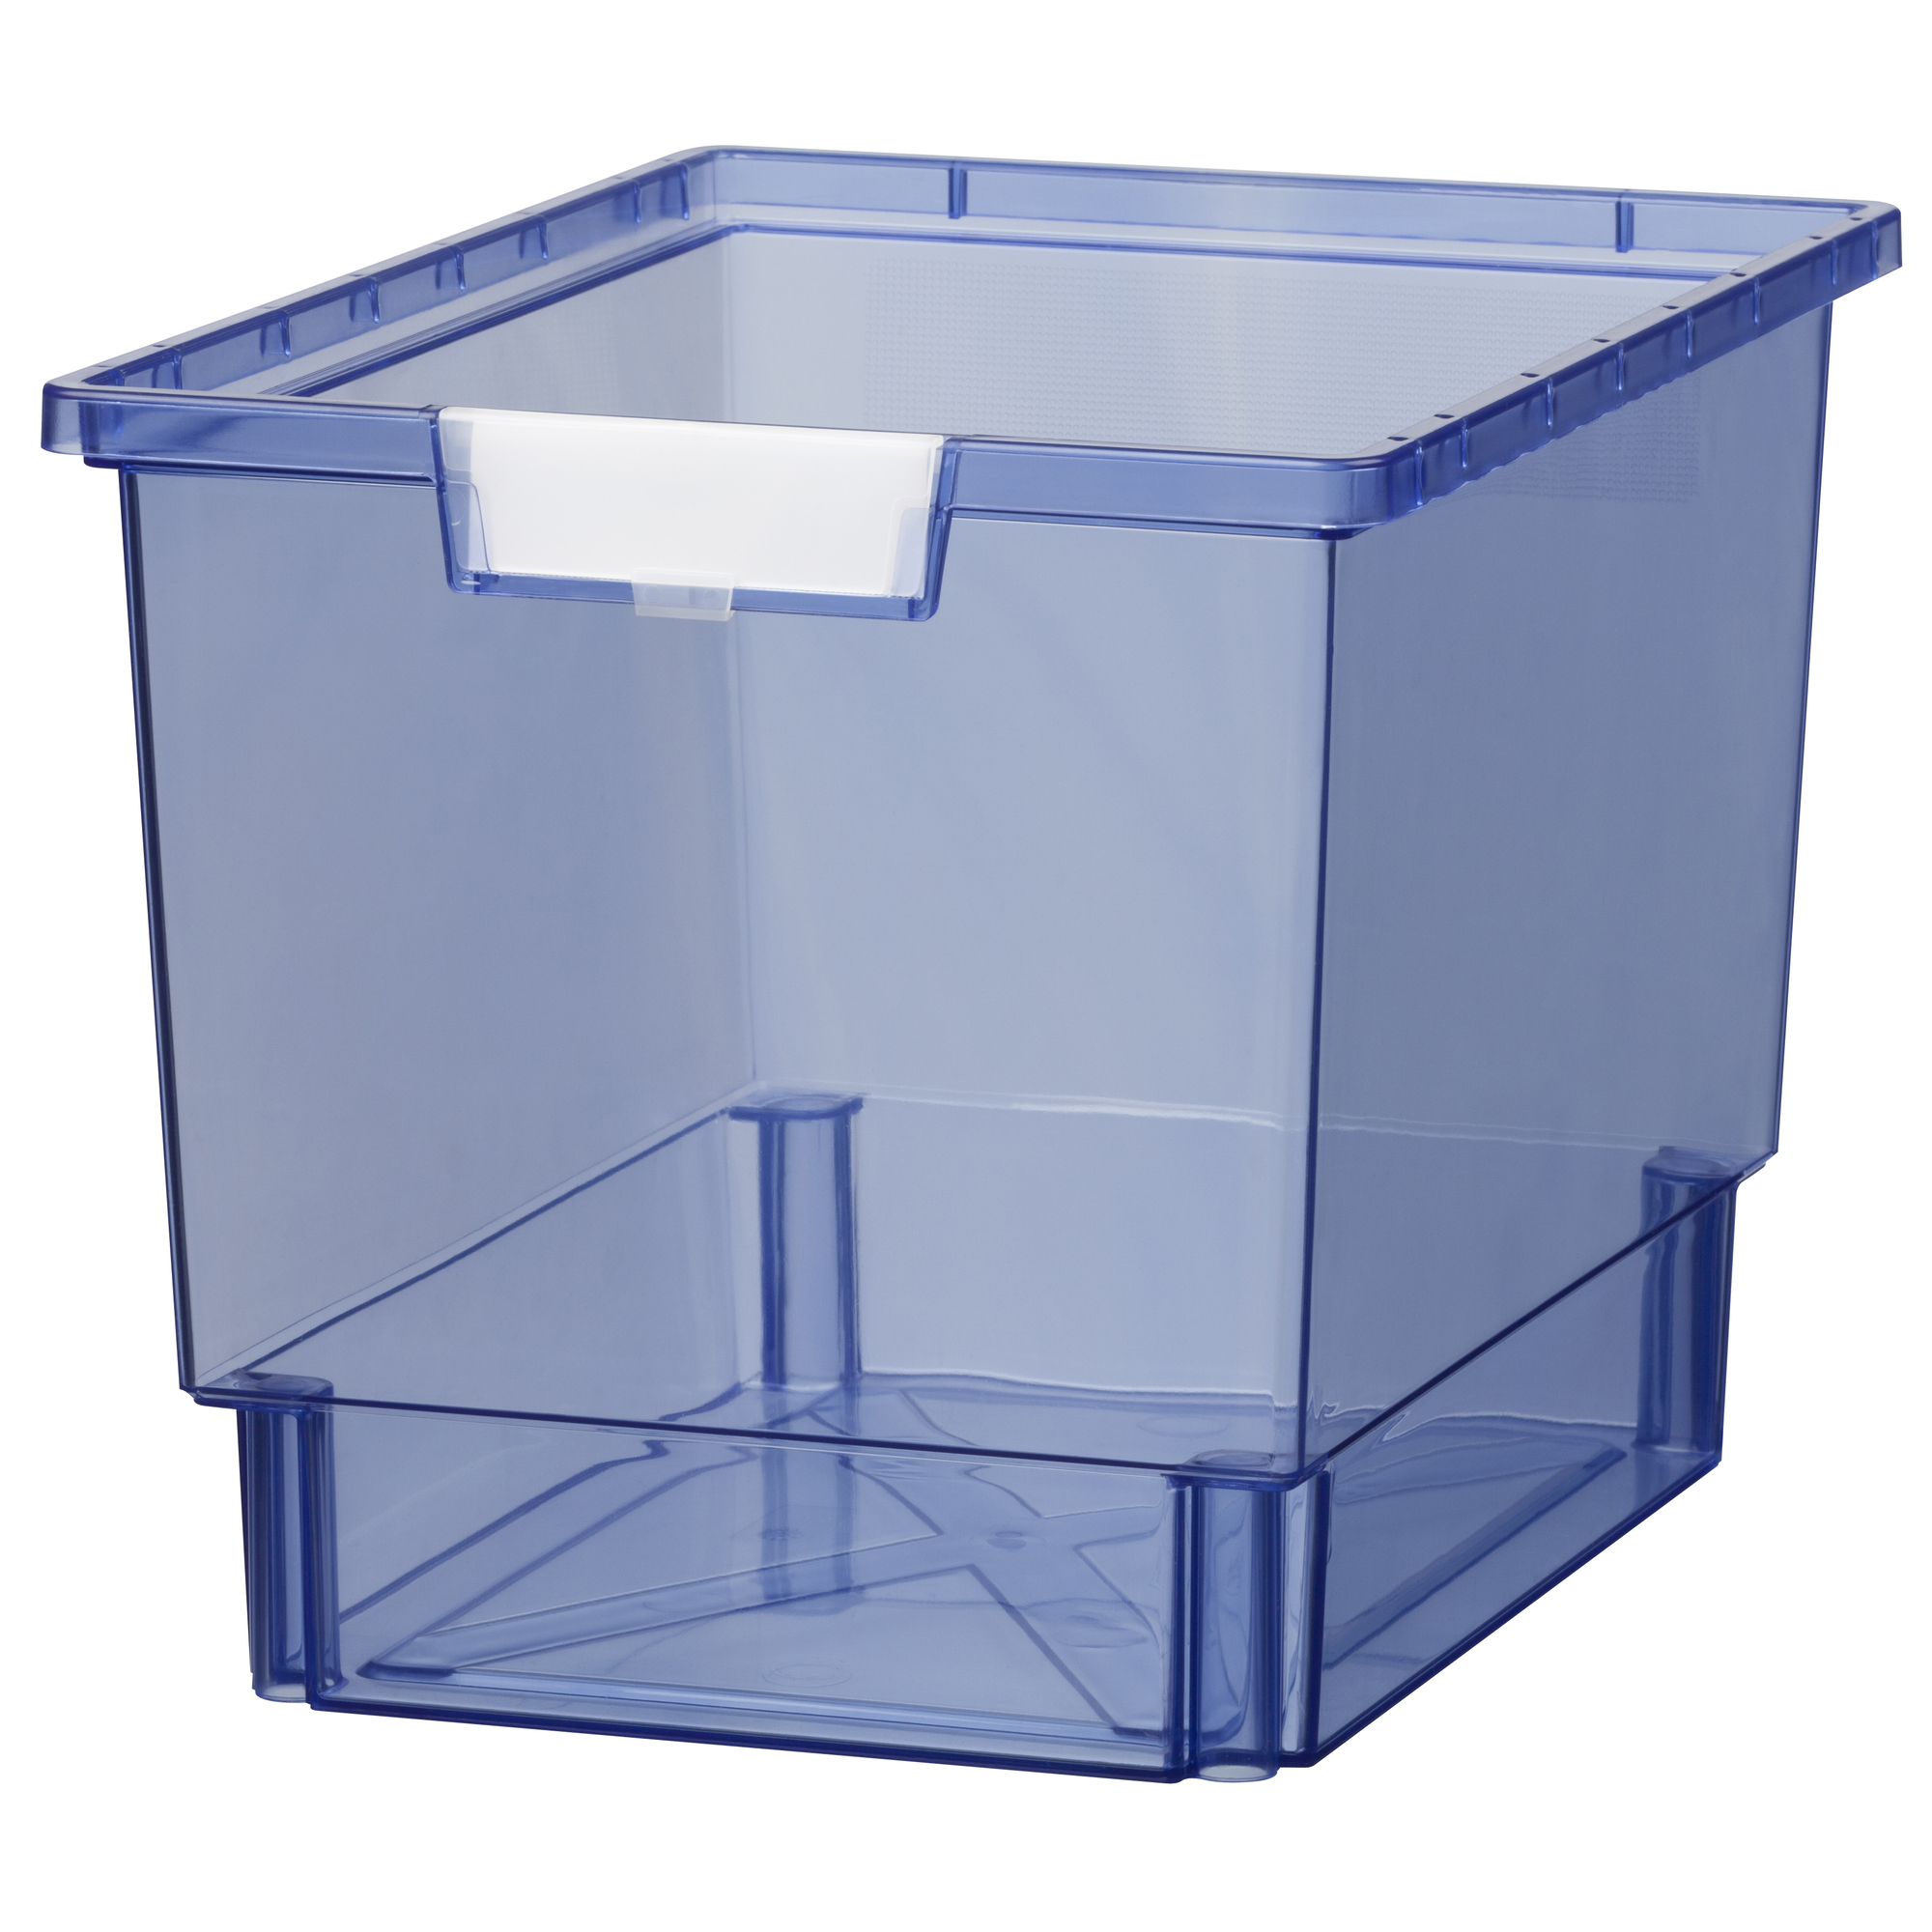 Certwood StorWerks, Slim Line 12Inch Tray in Tinted Blue - 1 Pack, Included (qty.) 1, Material Plastic, Height 12 in, Model CE1954TB1